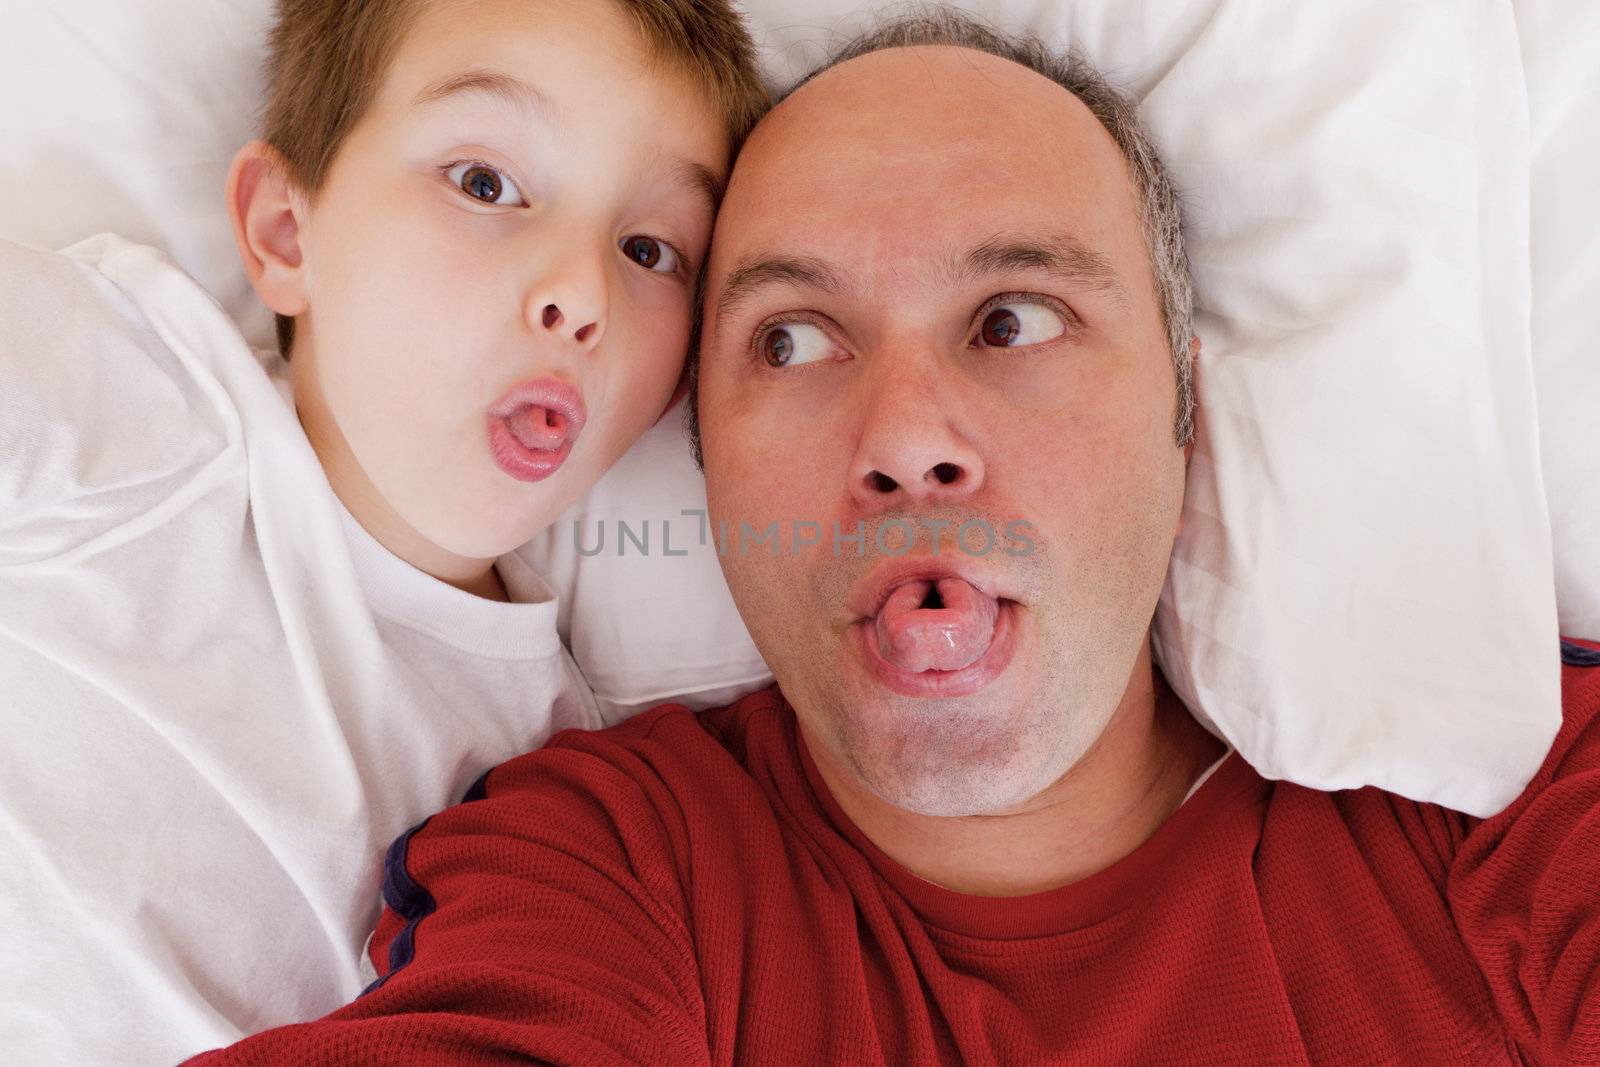 Father and son having fun in the bed by rolling their tongues.